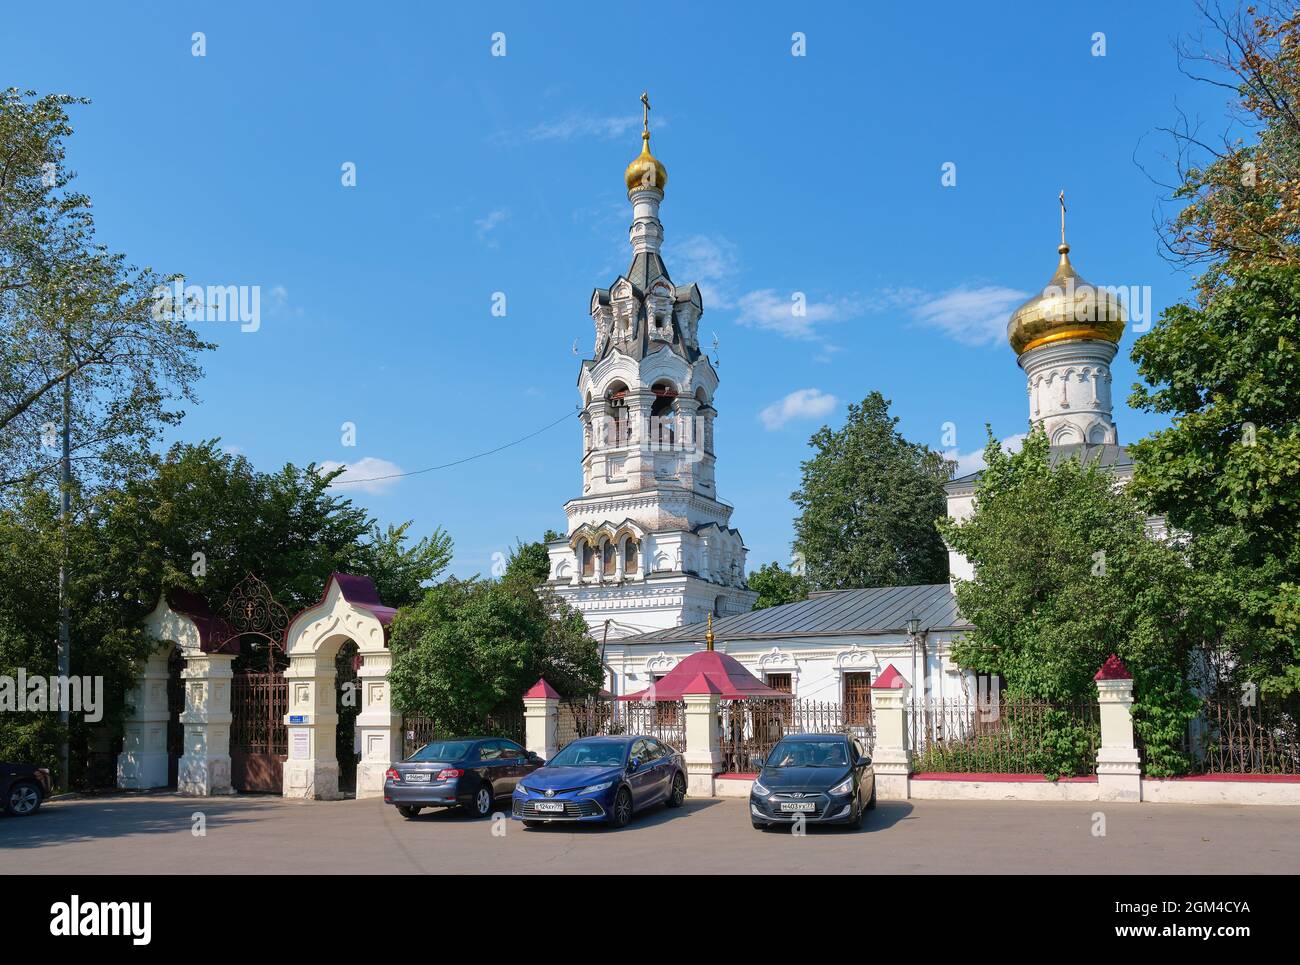 The white-stone Church of Elijah the Prophet in Cherkizovo, built in 1690, landmark: Moscow, Russia - August 15, 2021 Stock Photo